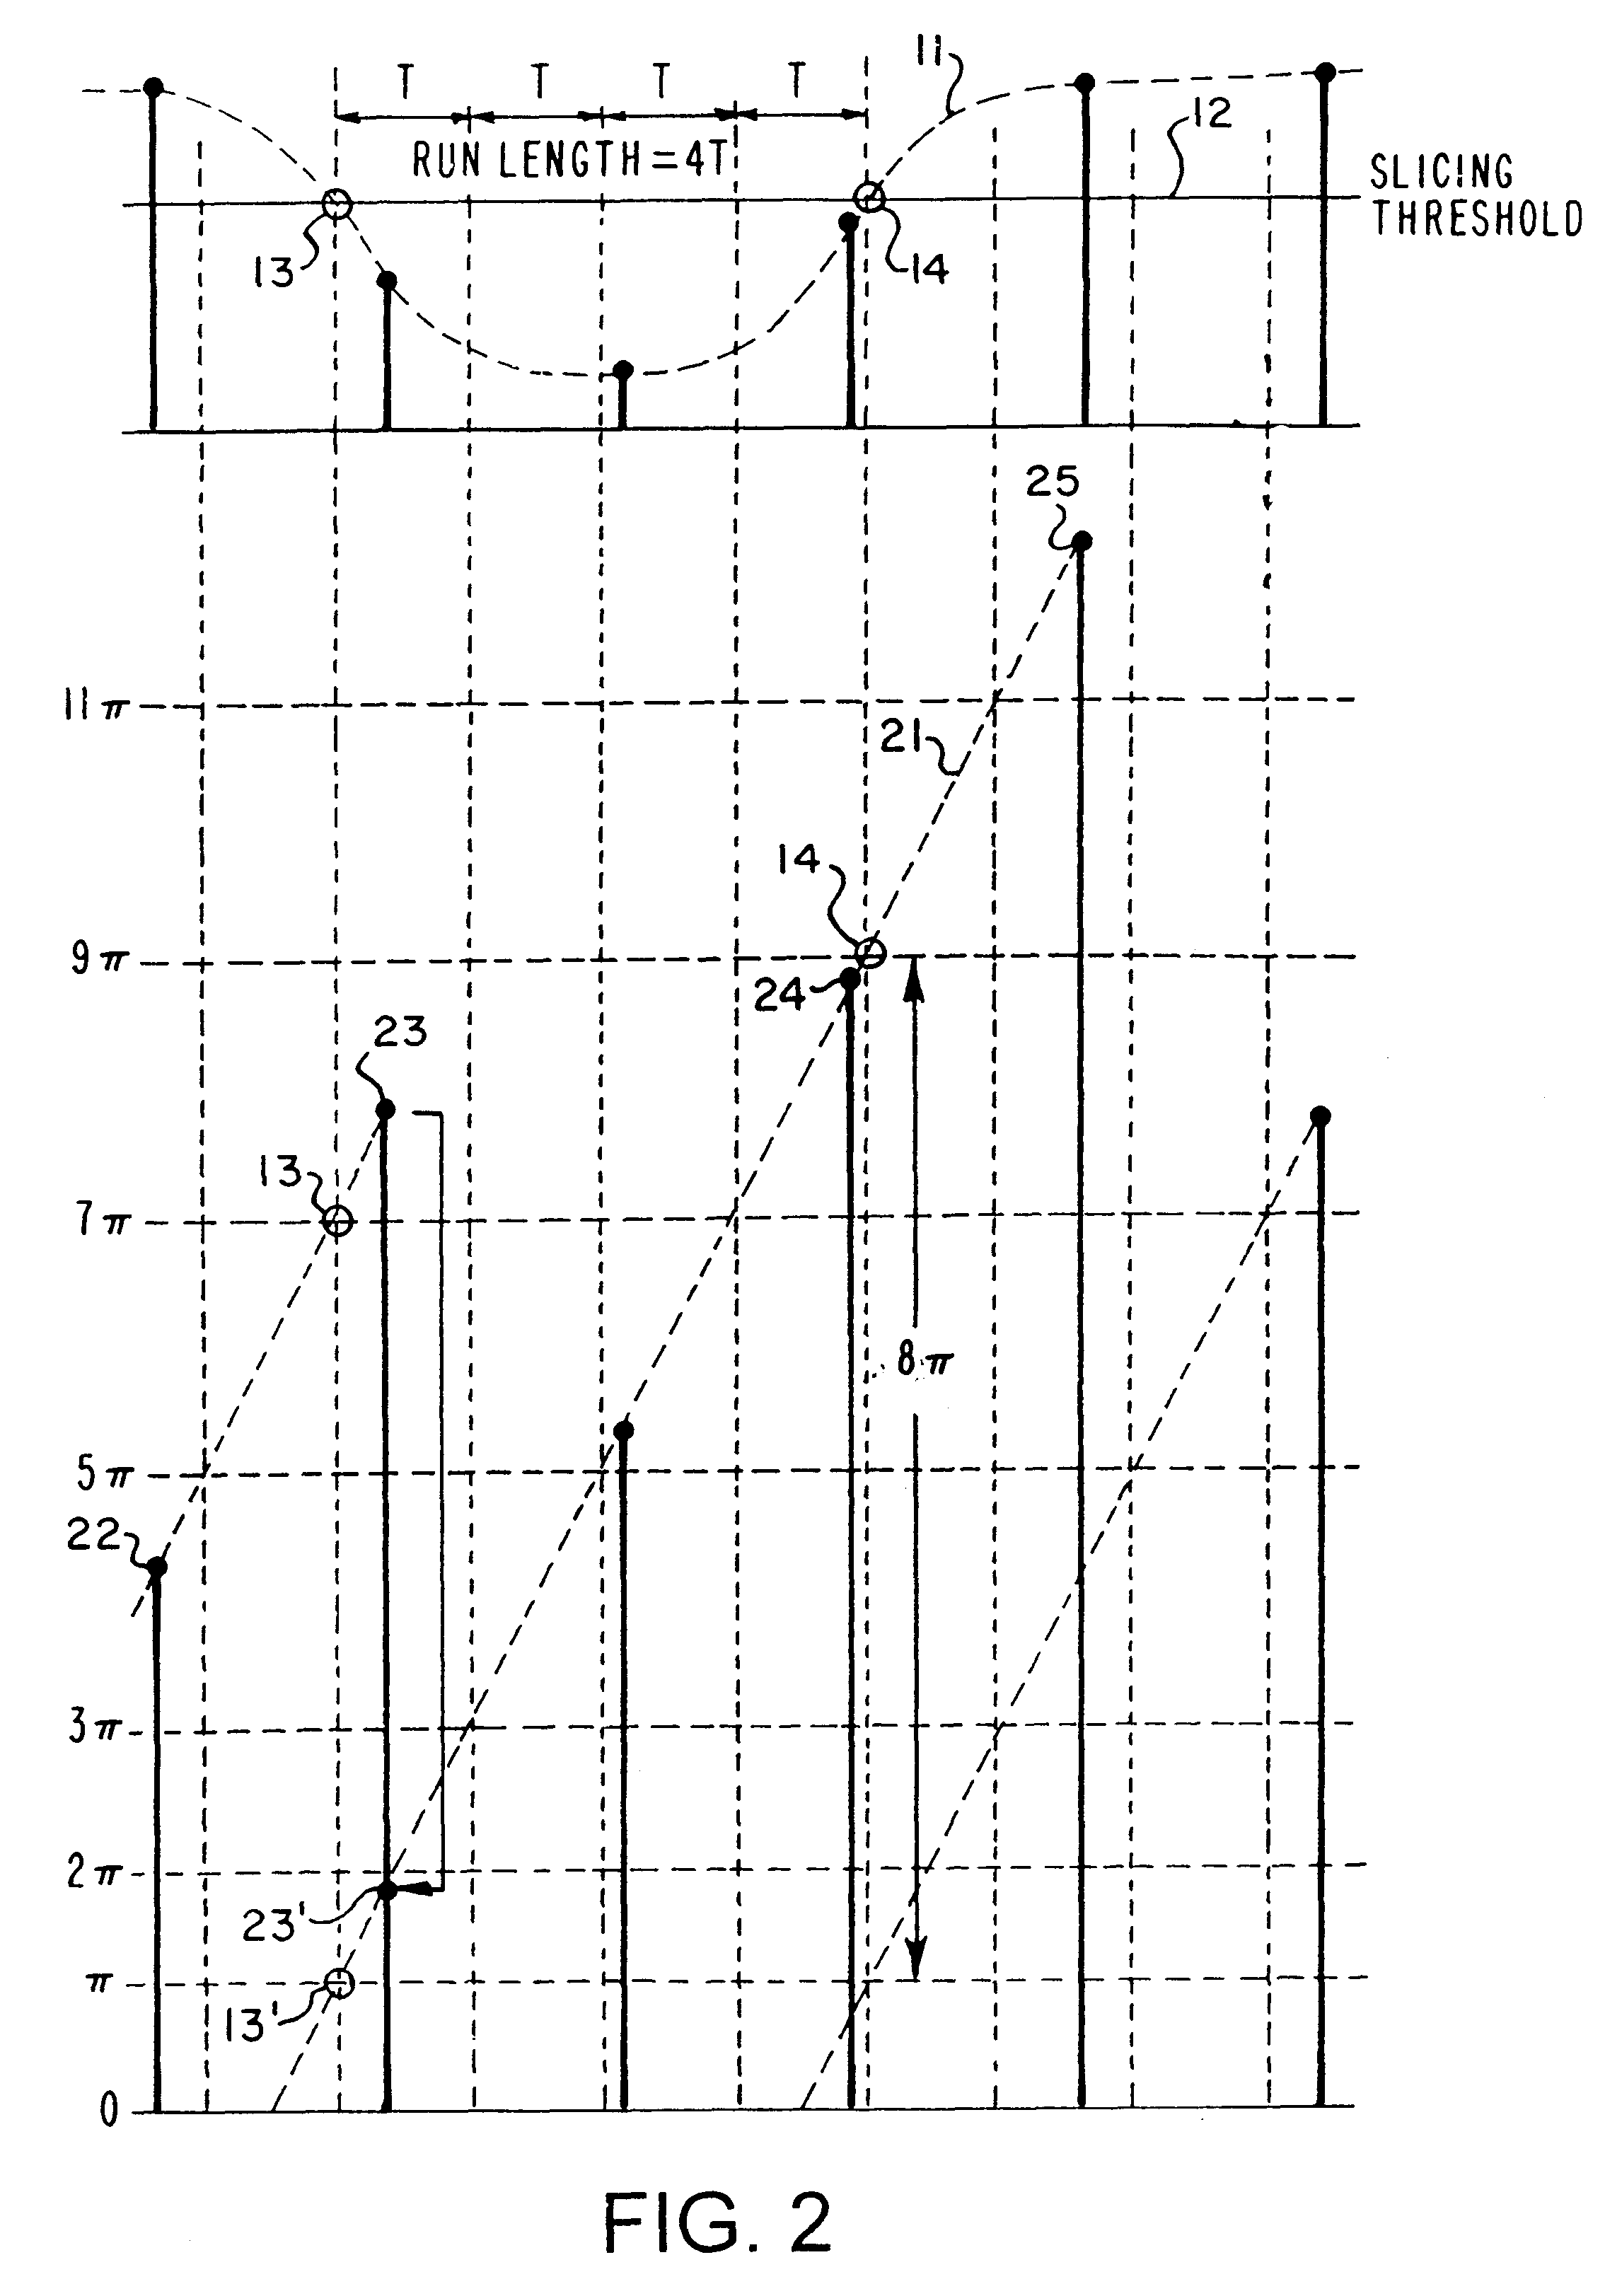 Pulse run-length measurement for HF data signal by dividing accumulated phase difference between first and second zero-crossings by single-cycle range using multiple cycle range sawtooth waveform